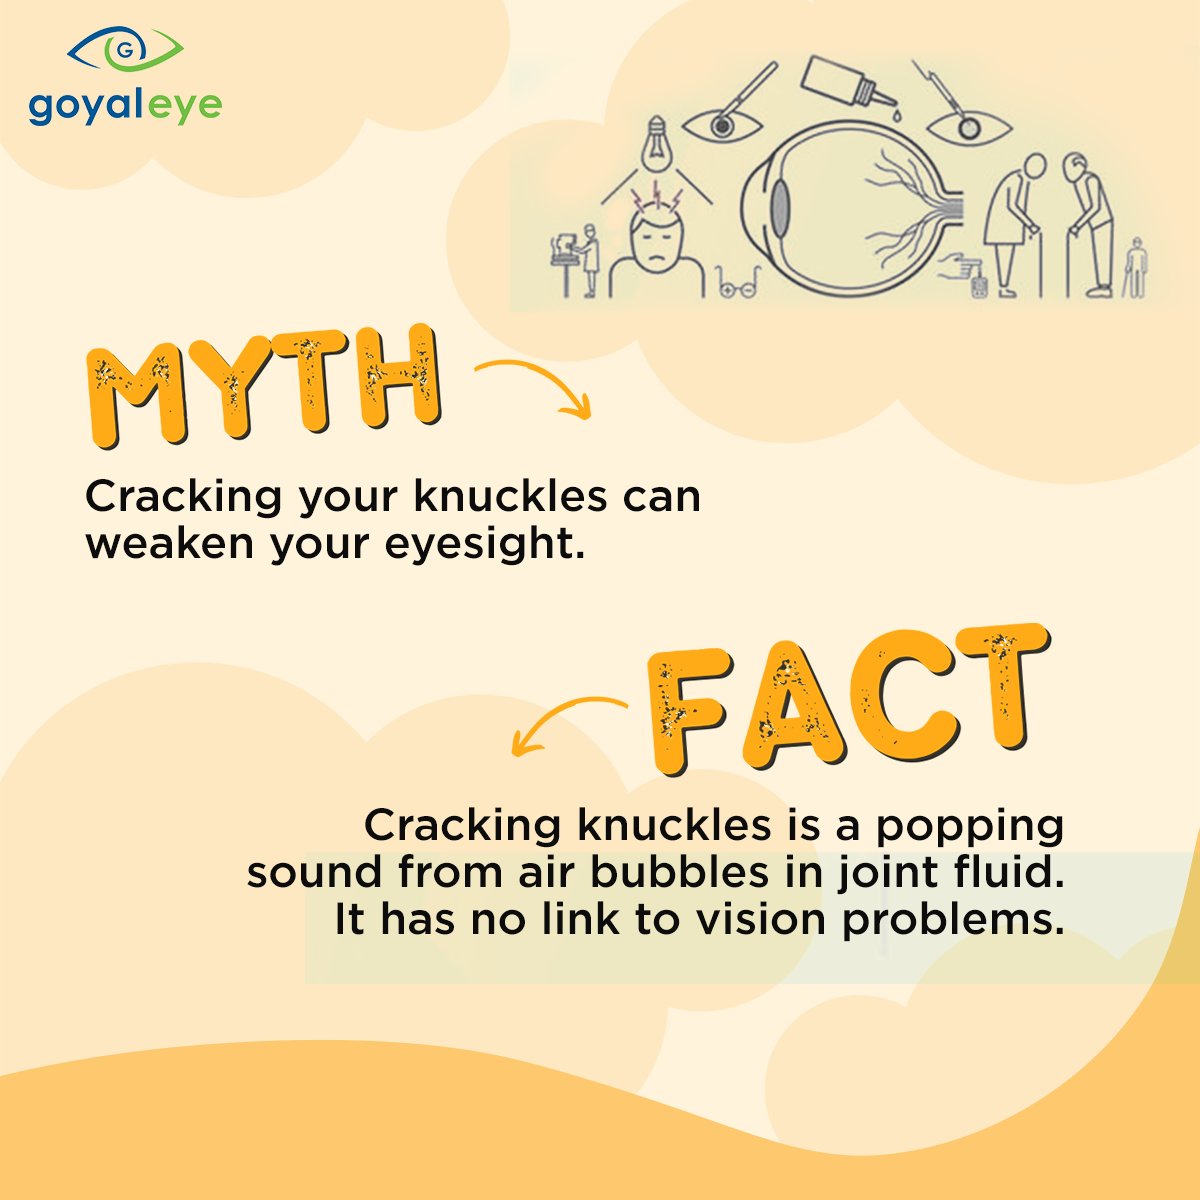 Do you fear that cracking your knuckles might harm your eyesight? 

Let's bust that myth! When you crack your knuckles, the sound is caused by the release of gas bubbles in the synovial fluid, which lubricates your joints.

#GoyalEye #EyeMythsAndFacts  #EyeMyths #EyeFacts